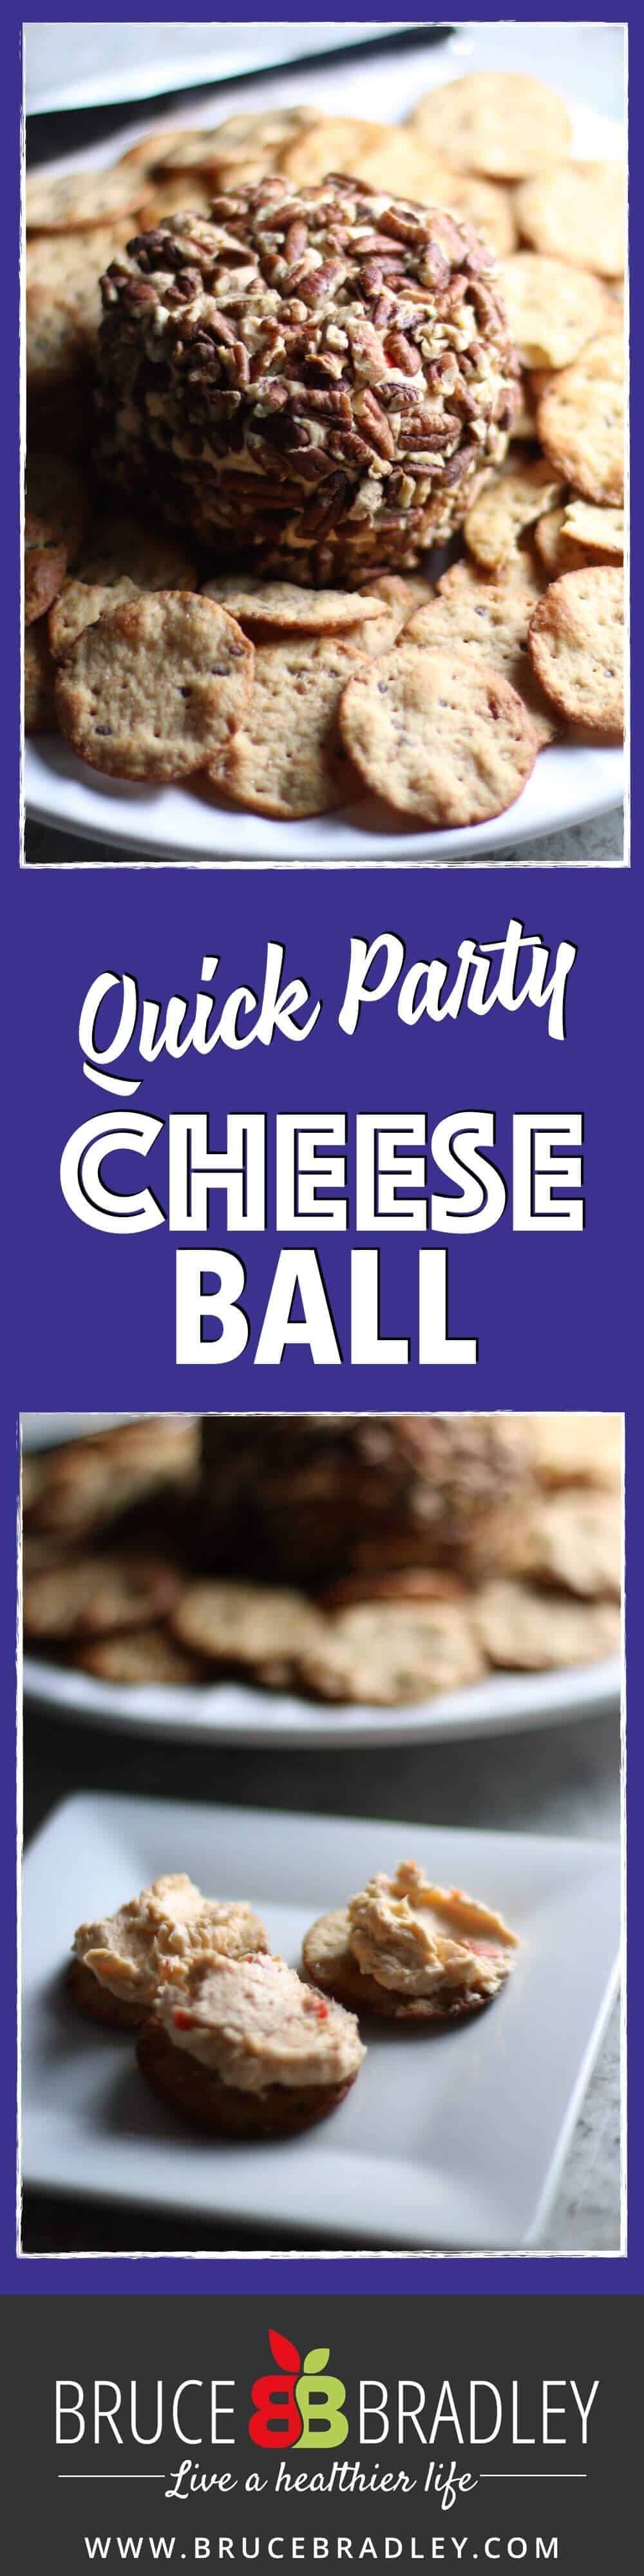 This Quick Party Cheese Ball Recipe Is A Crowd-Pleasing Appetizer That Can Be Made Ahead Of Time And Is Made From Real Ingredients!